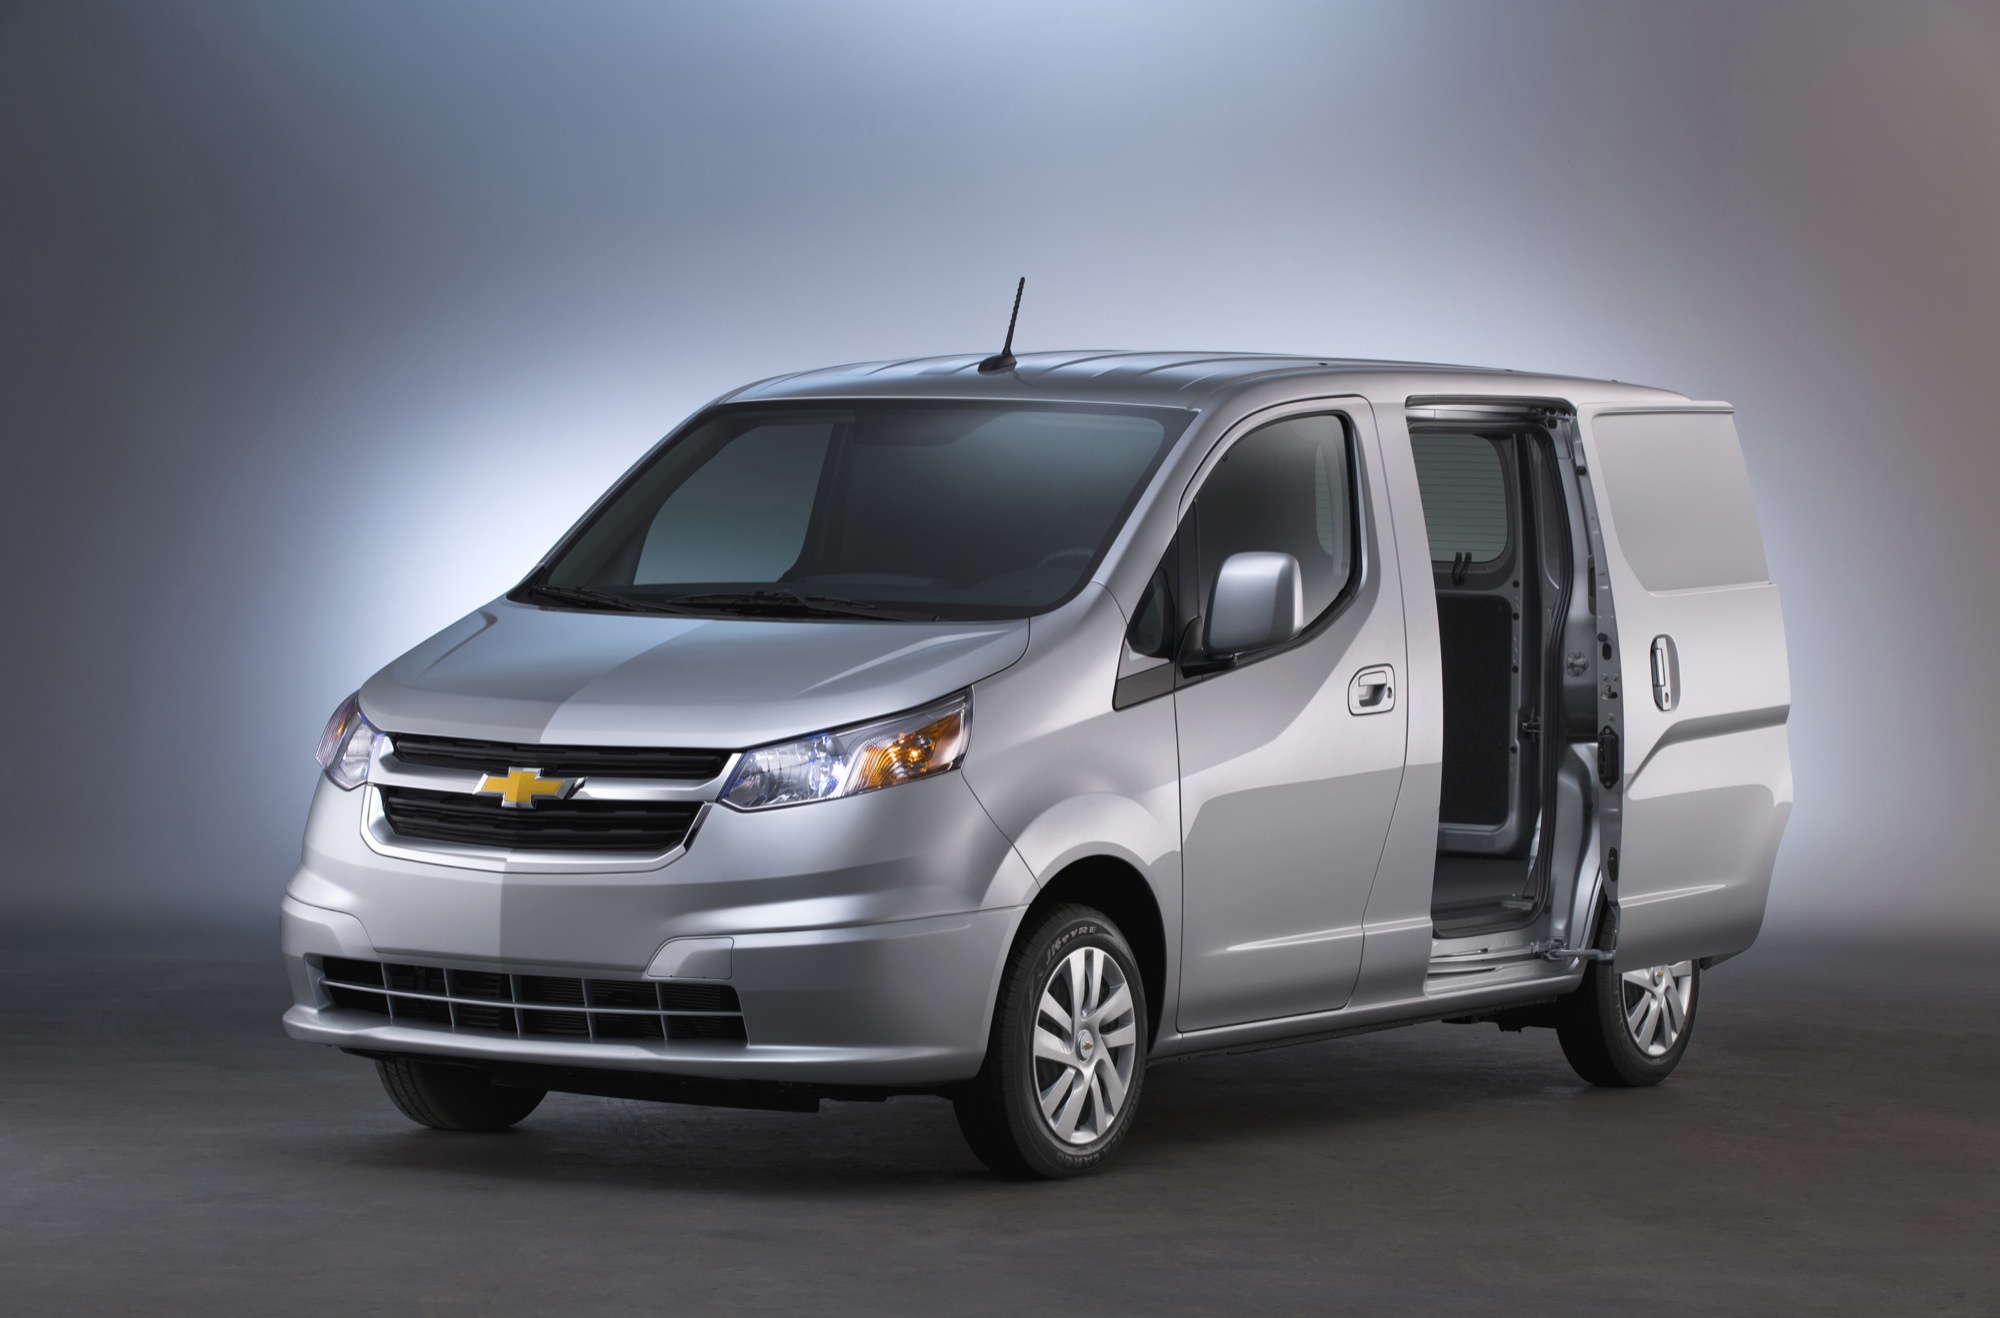 2018 Chevy City Express Gets Standard 